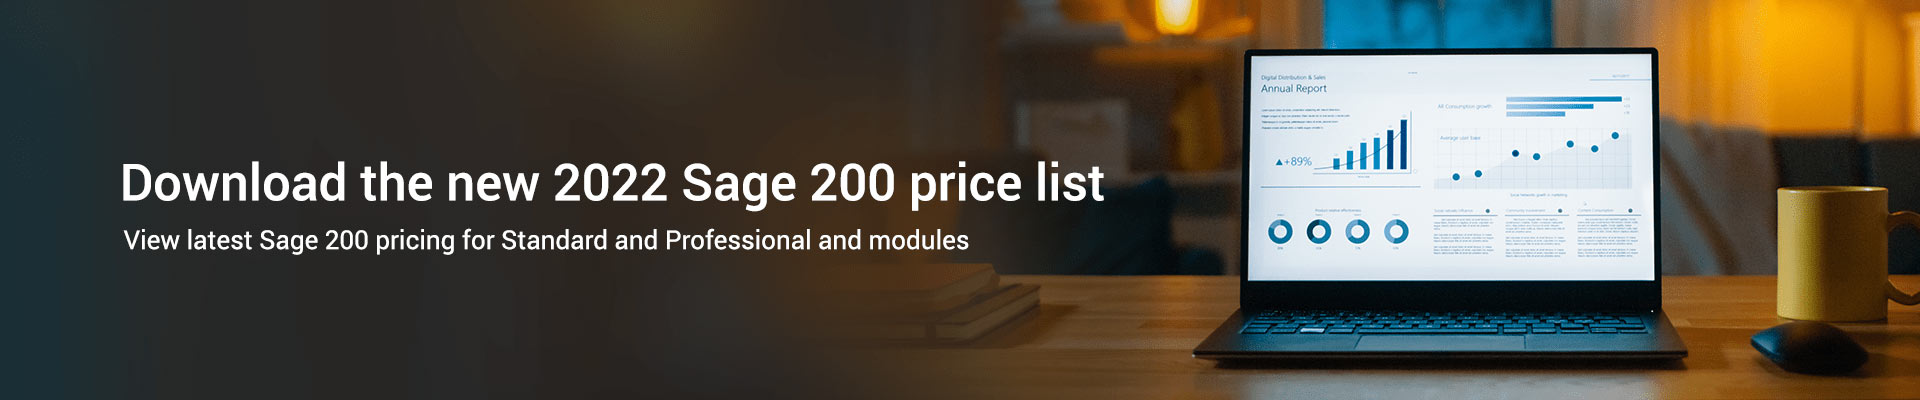 Download-the-new-2022-Sage-200-price-list